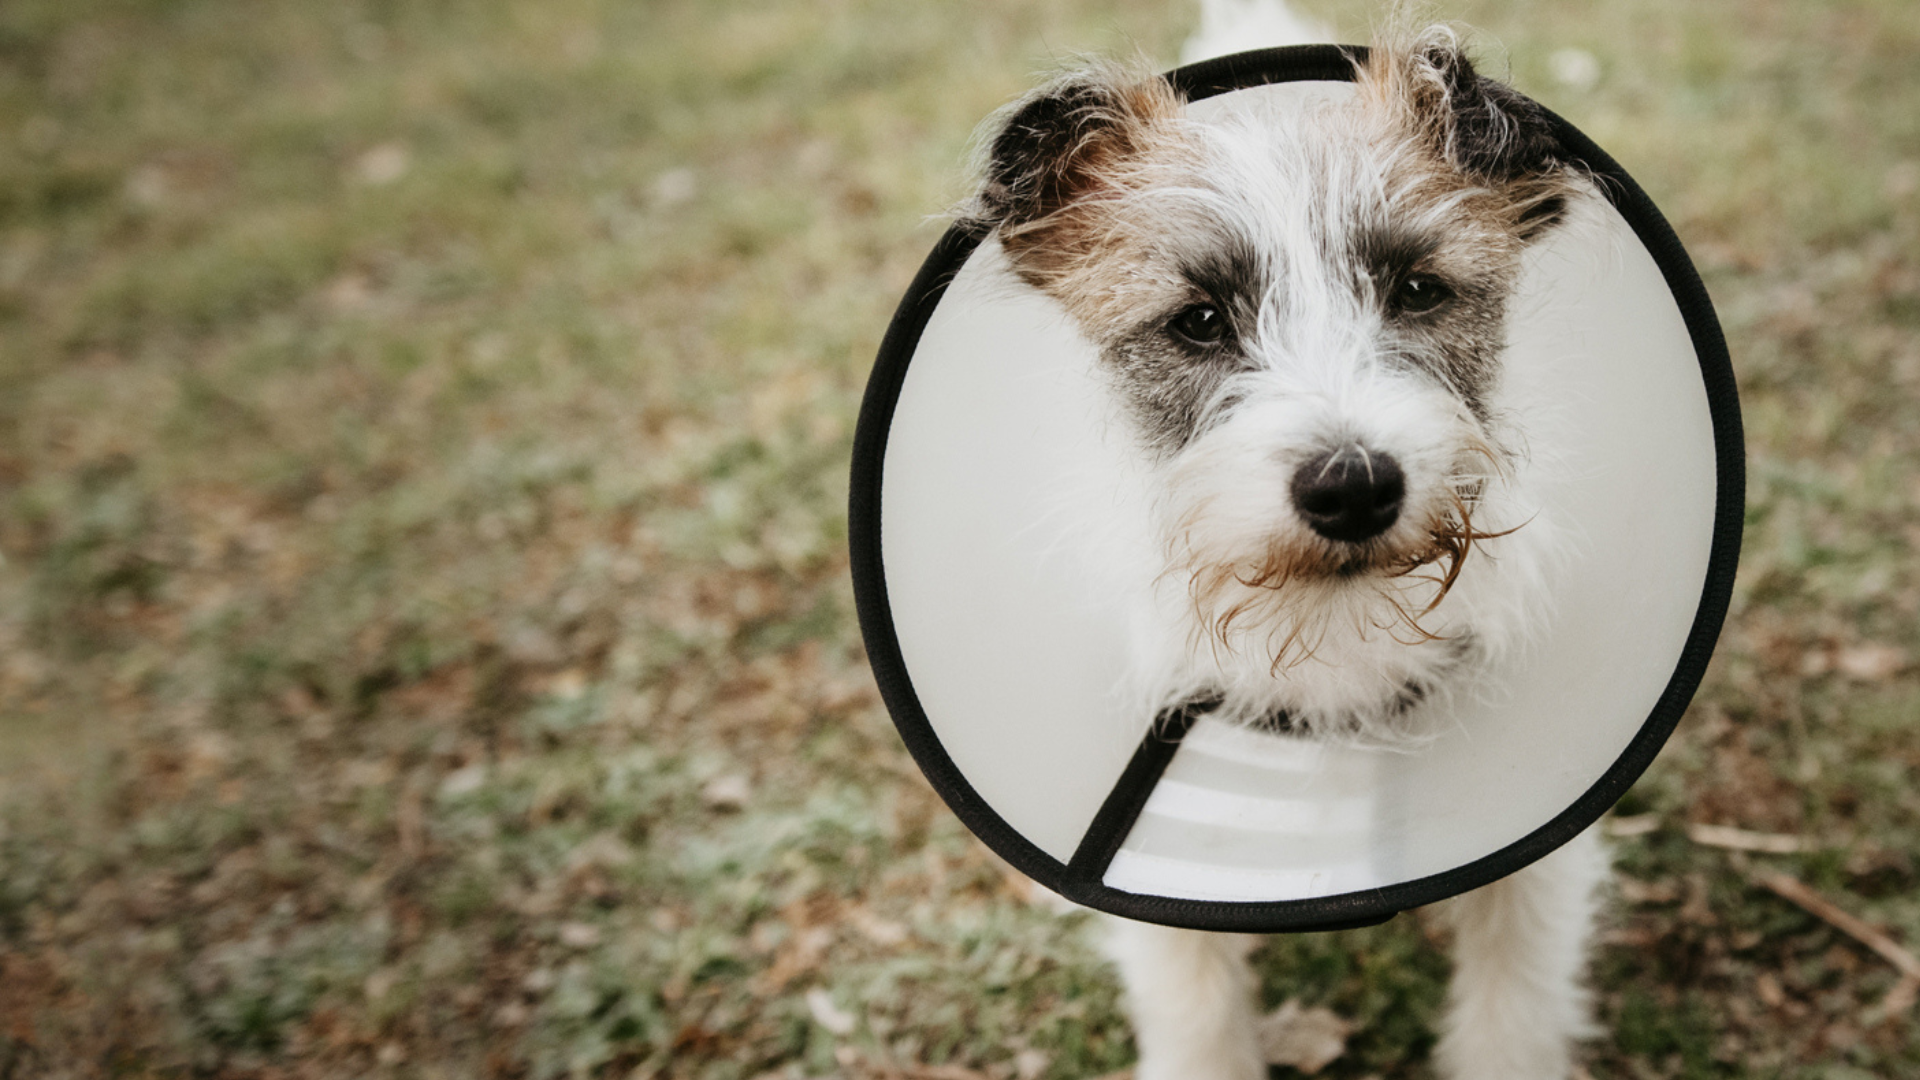 a dog with a cone around its neck